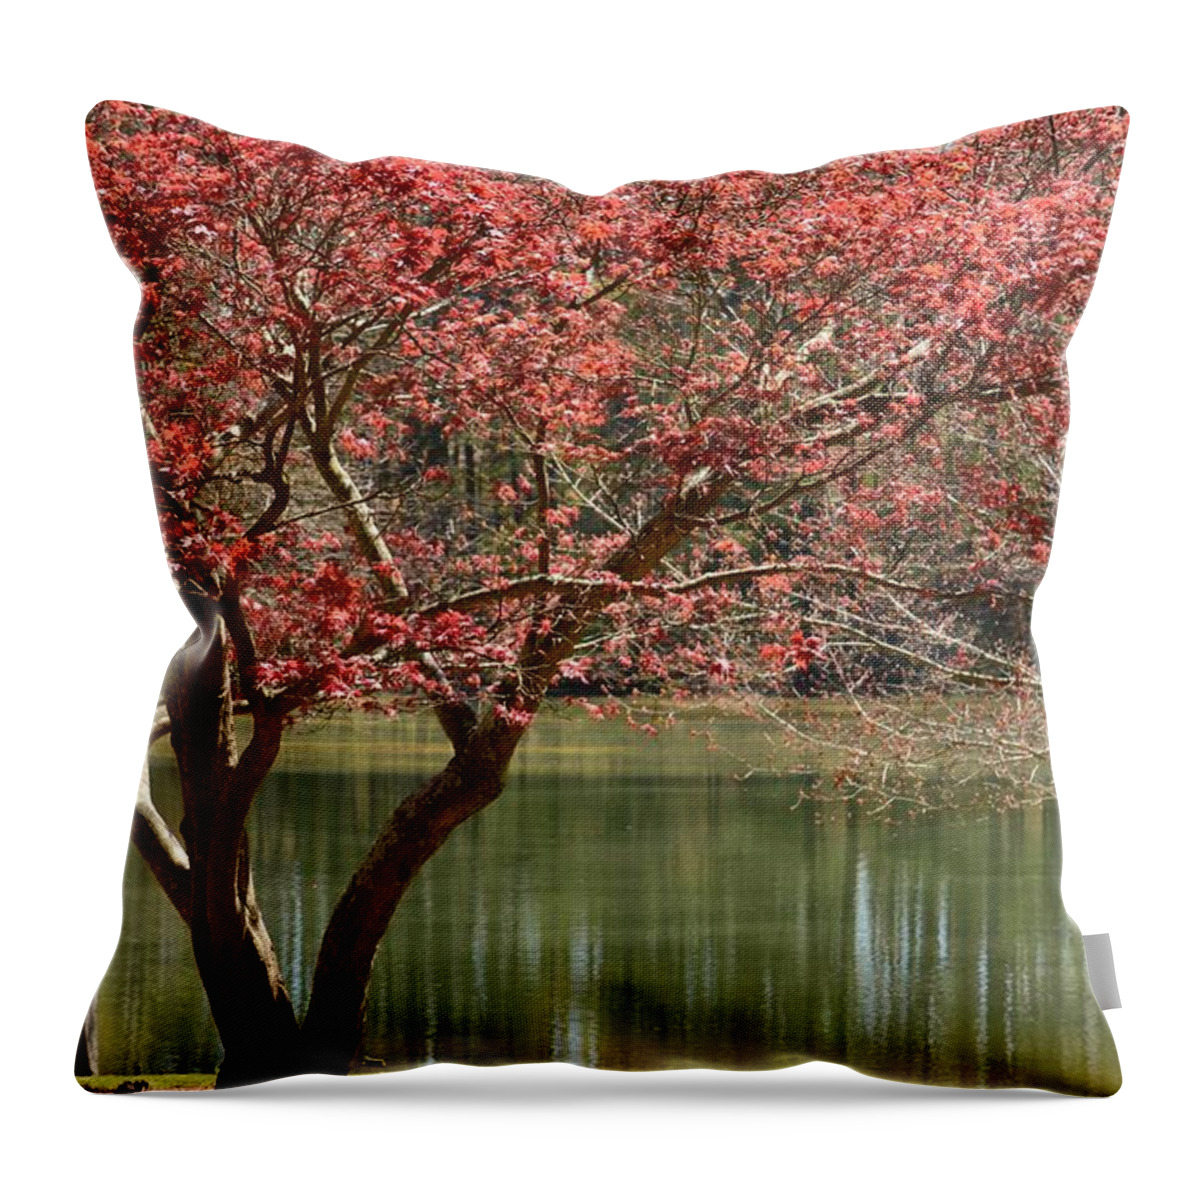 Red Maple Throw Pillow featuring the photograph Red Maple by Maria Urso